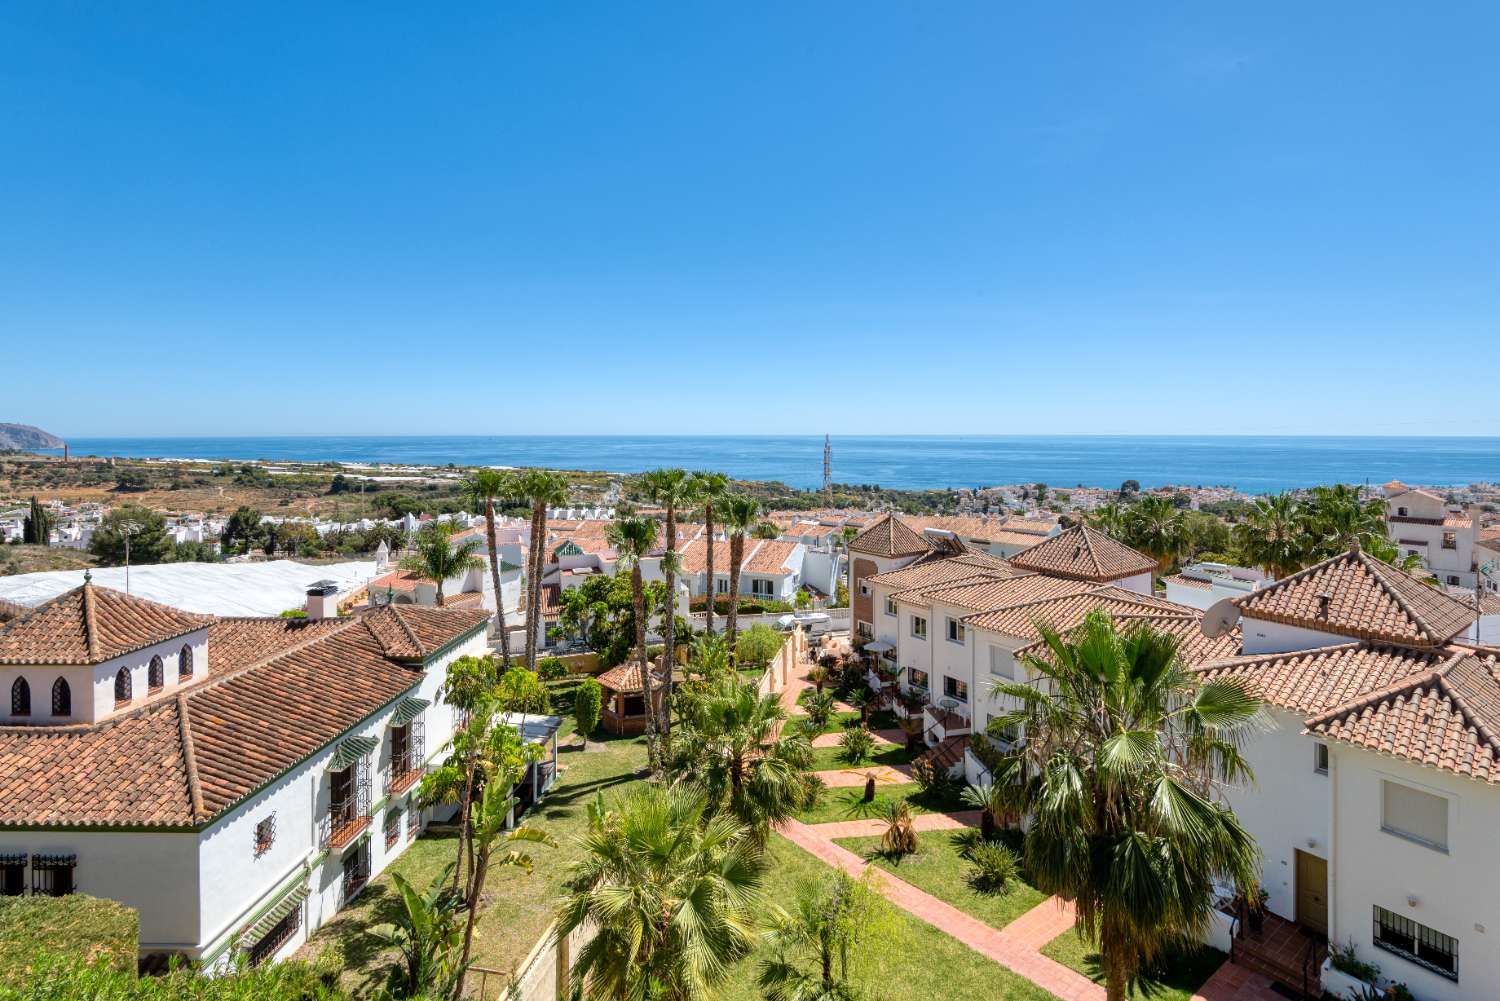 New to the market one of the best penthouses in Nerja with spectacular 180 degree views of mountains, sea and all of Nerja.